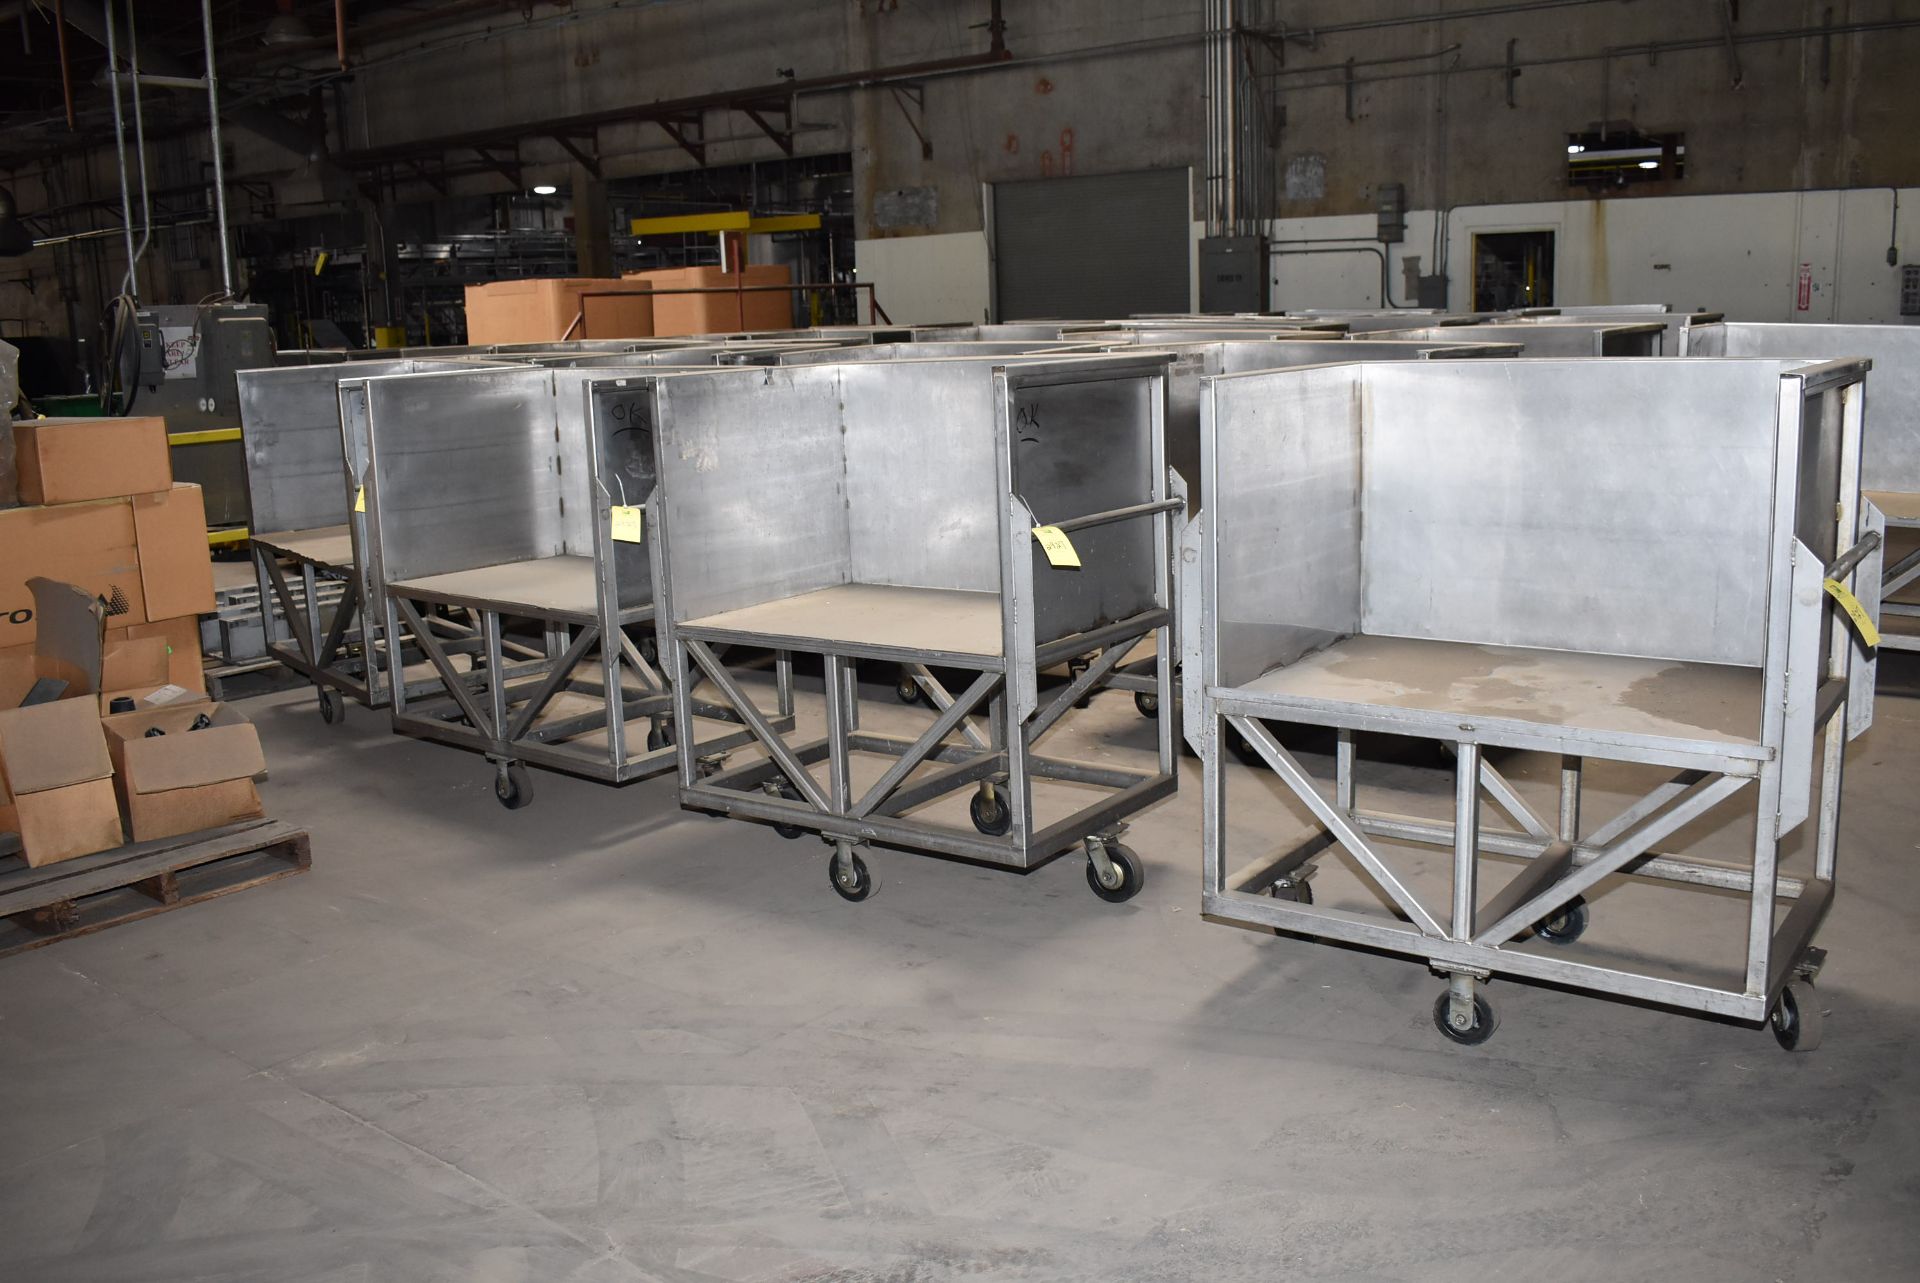 (4) Stainless Steel 4-Wheel Carts, 44" x 30" x 27" Wide w/One Open Side, RIGGING FEE: $100 - Image 2 of 2